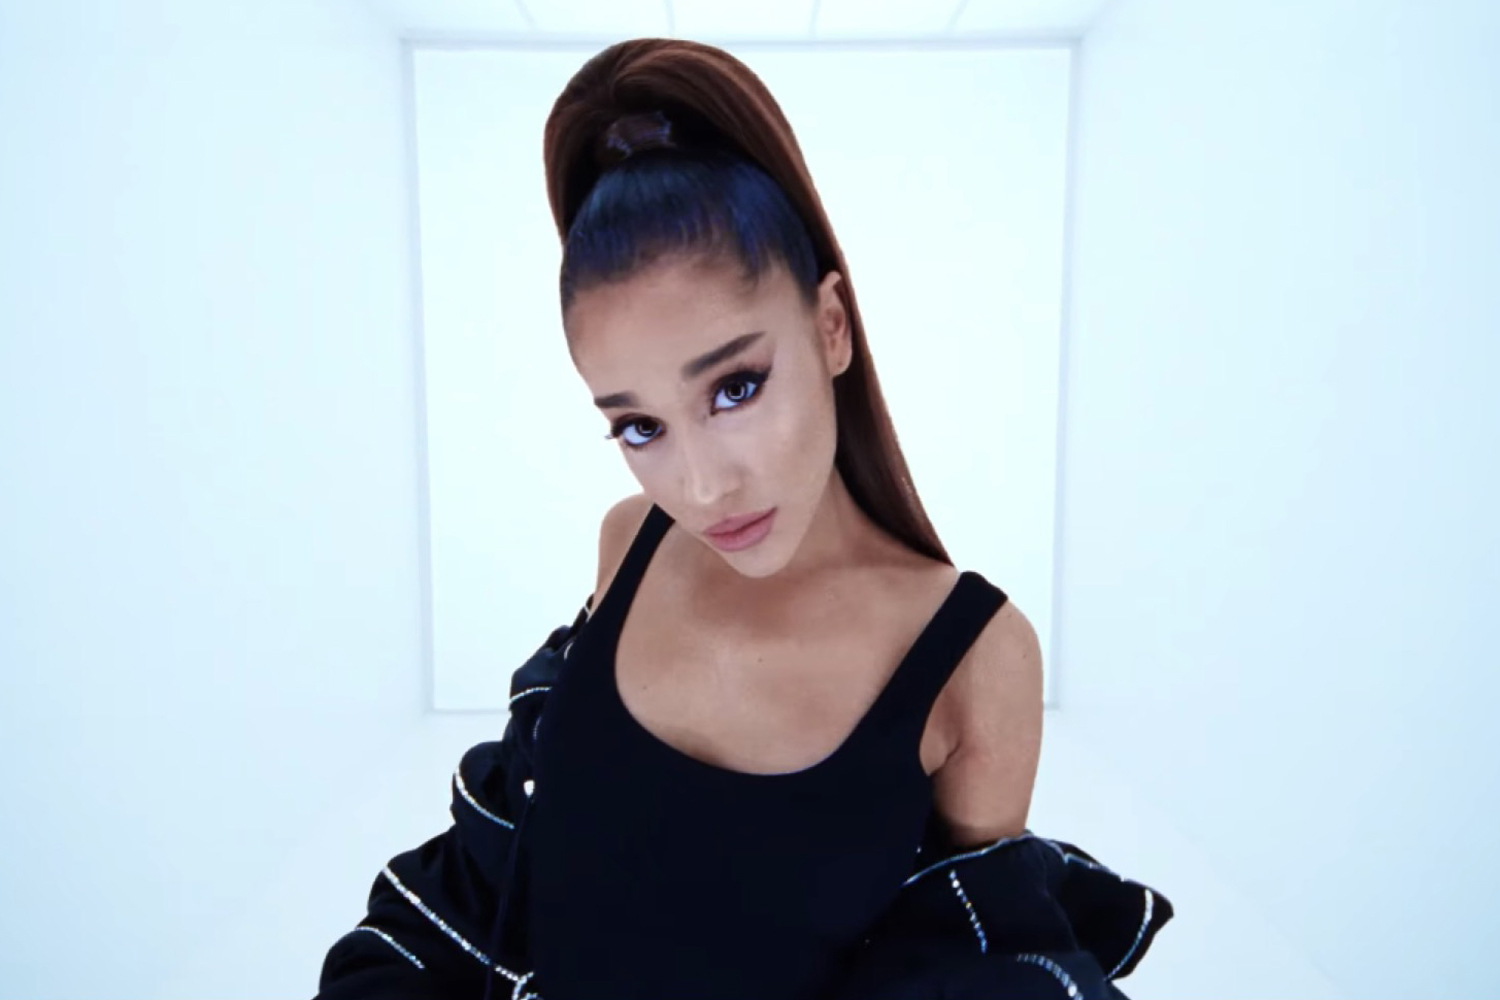 chloee louise recommends Ariana Grande Giving Head